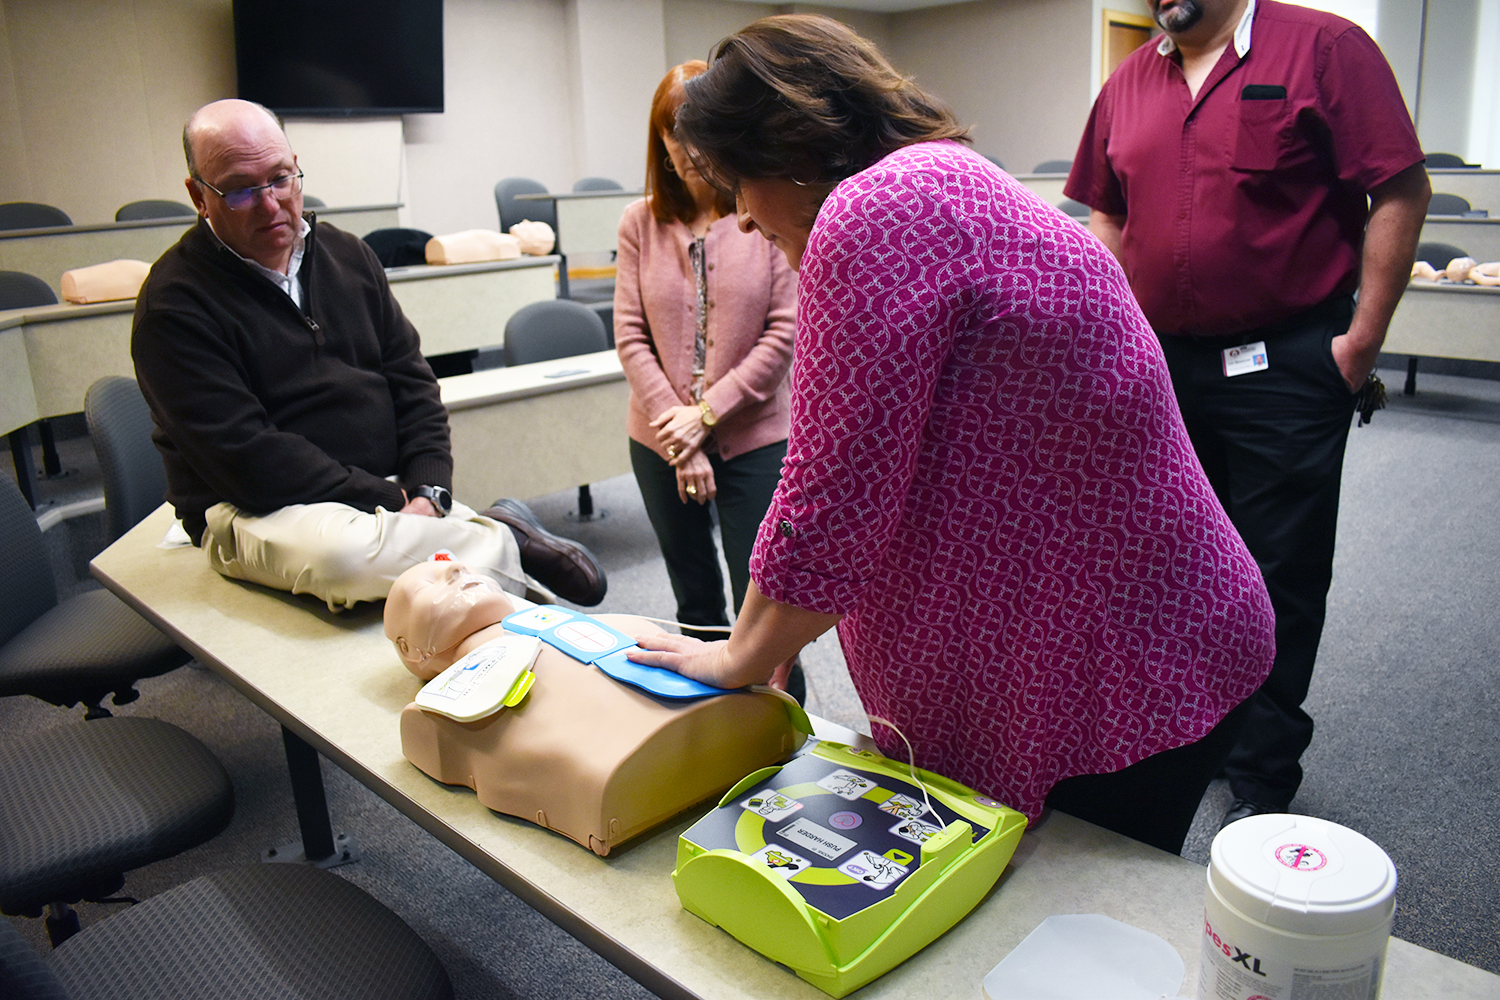 CPR instructor shows how to lay the pads of the AED device on the chest of someone experiencing cardiac arrest.